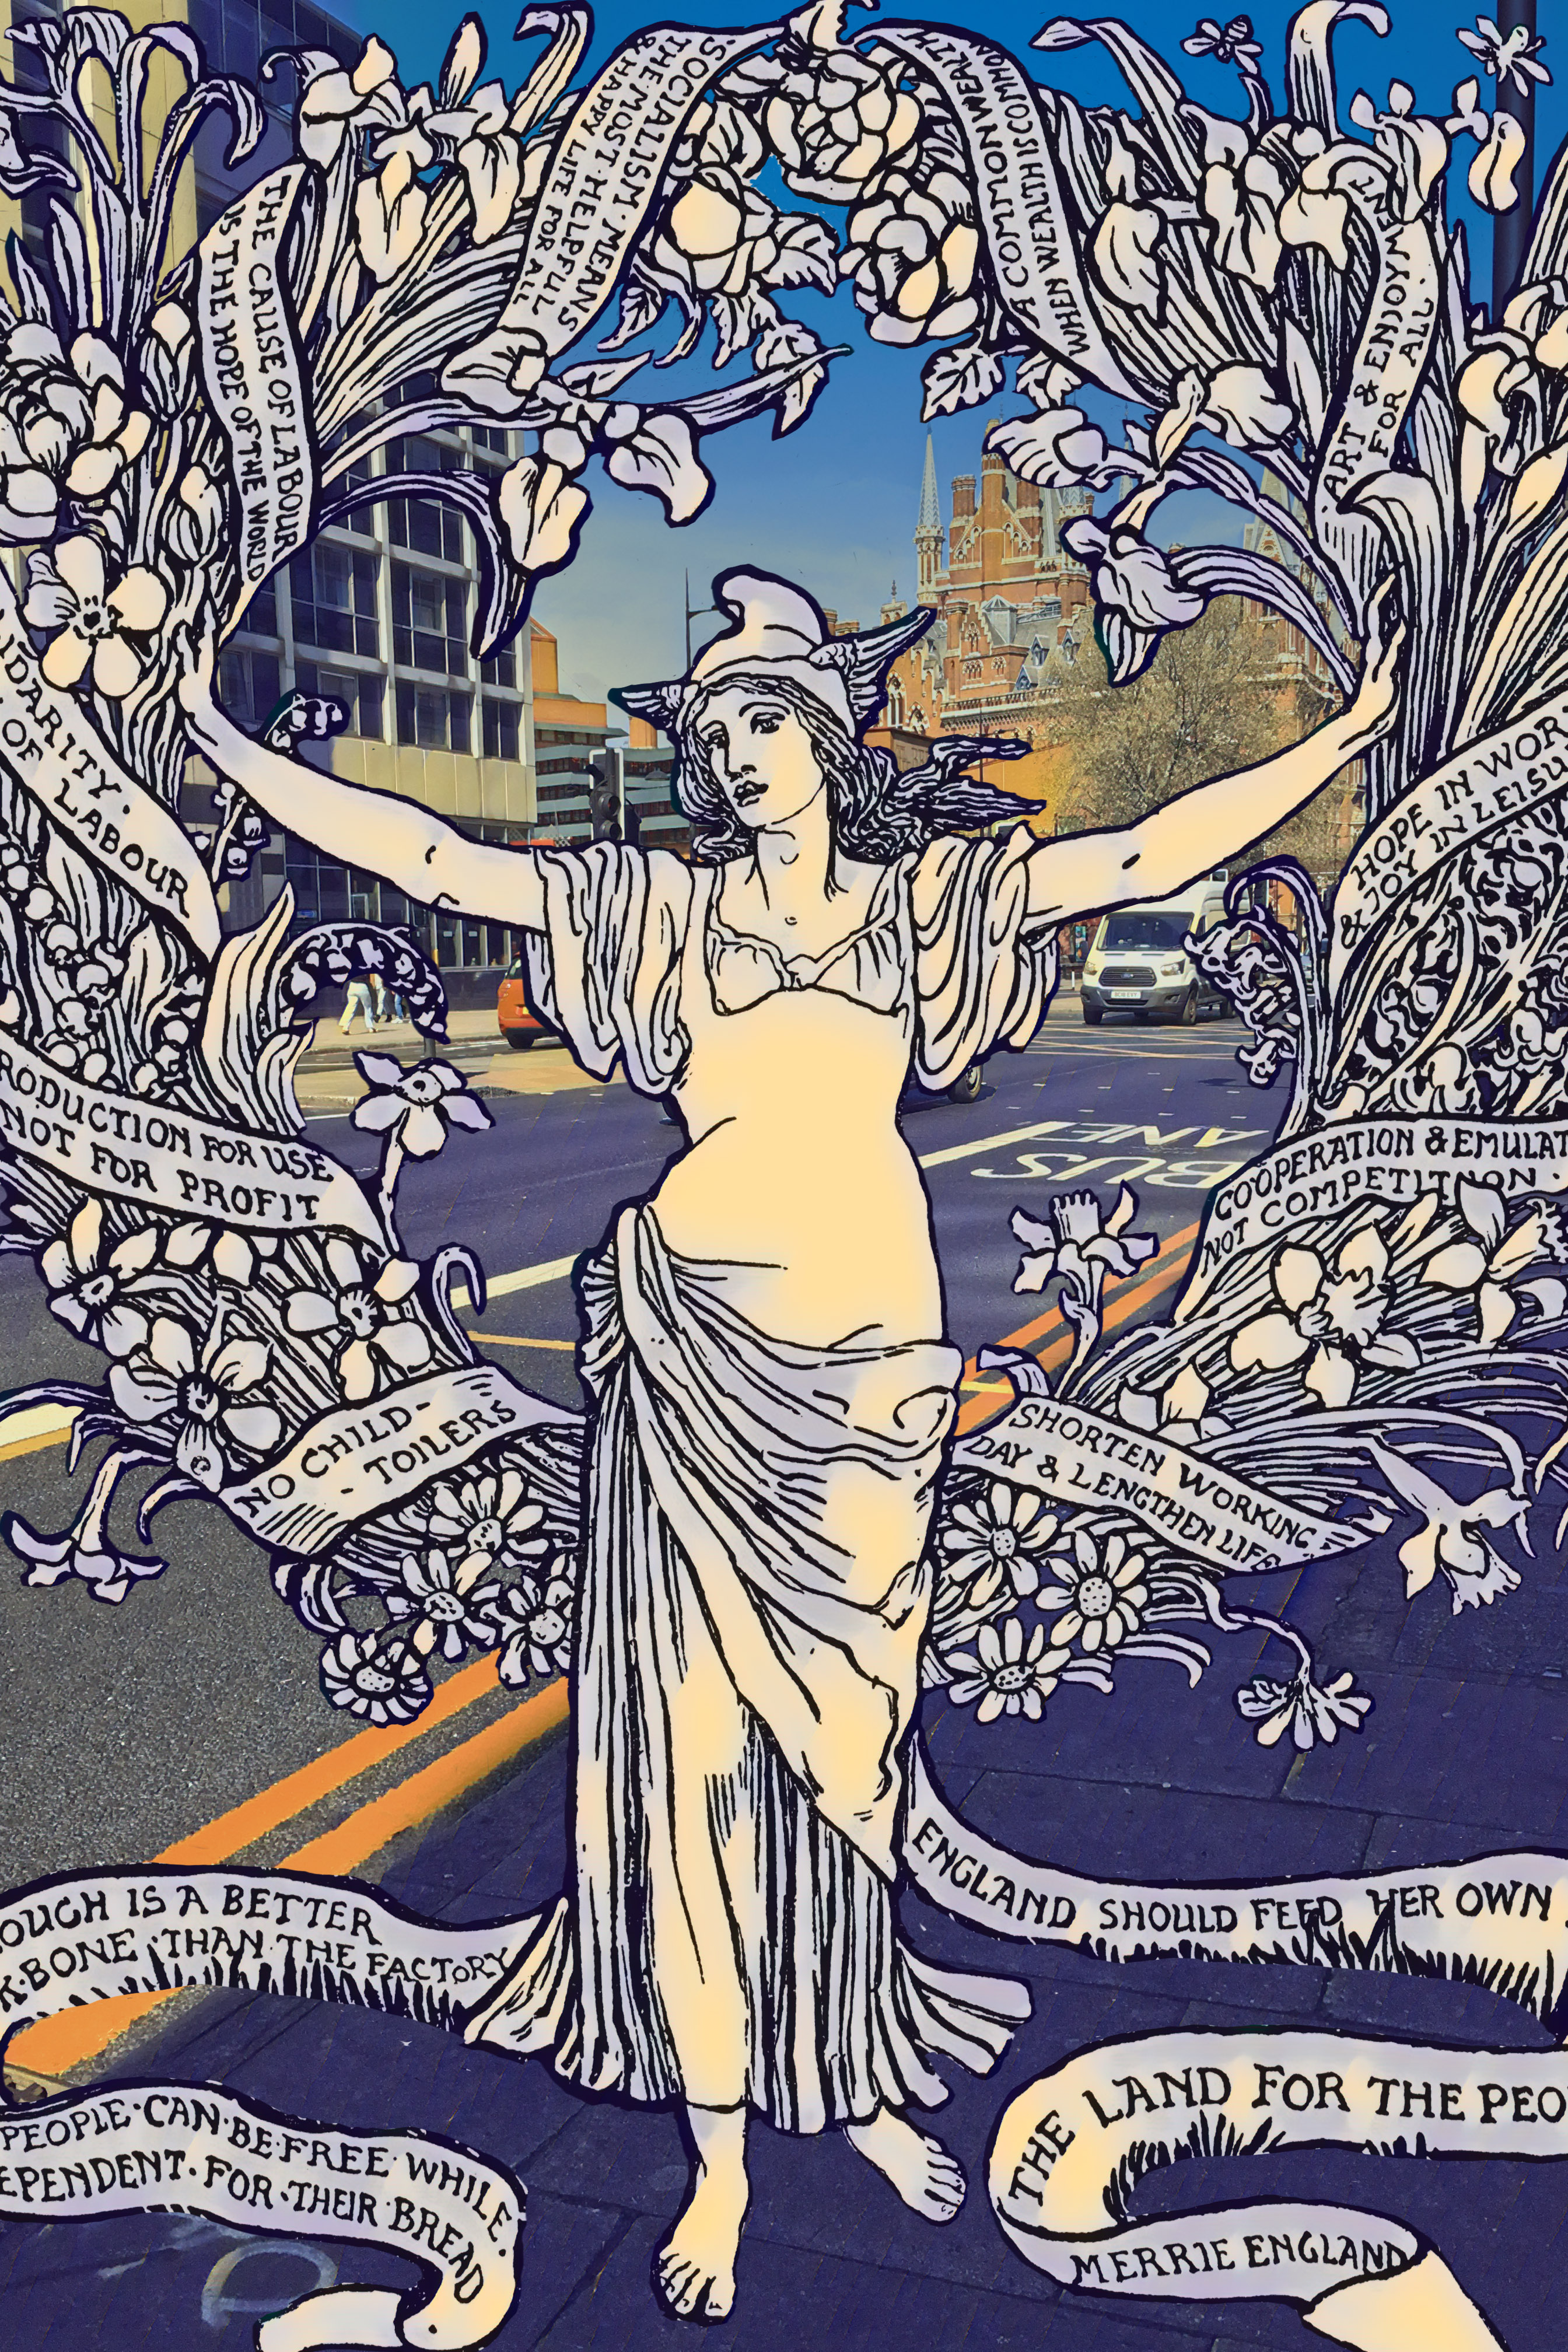 Walter Crane’s “A Garland for Mayday 1895” (1895) on Euston Road (near the British Library) in London